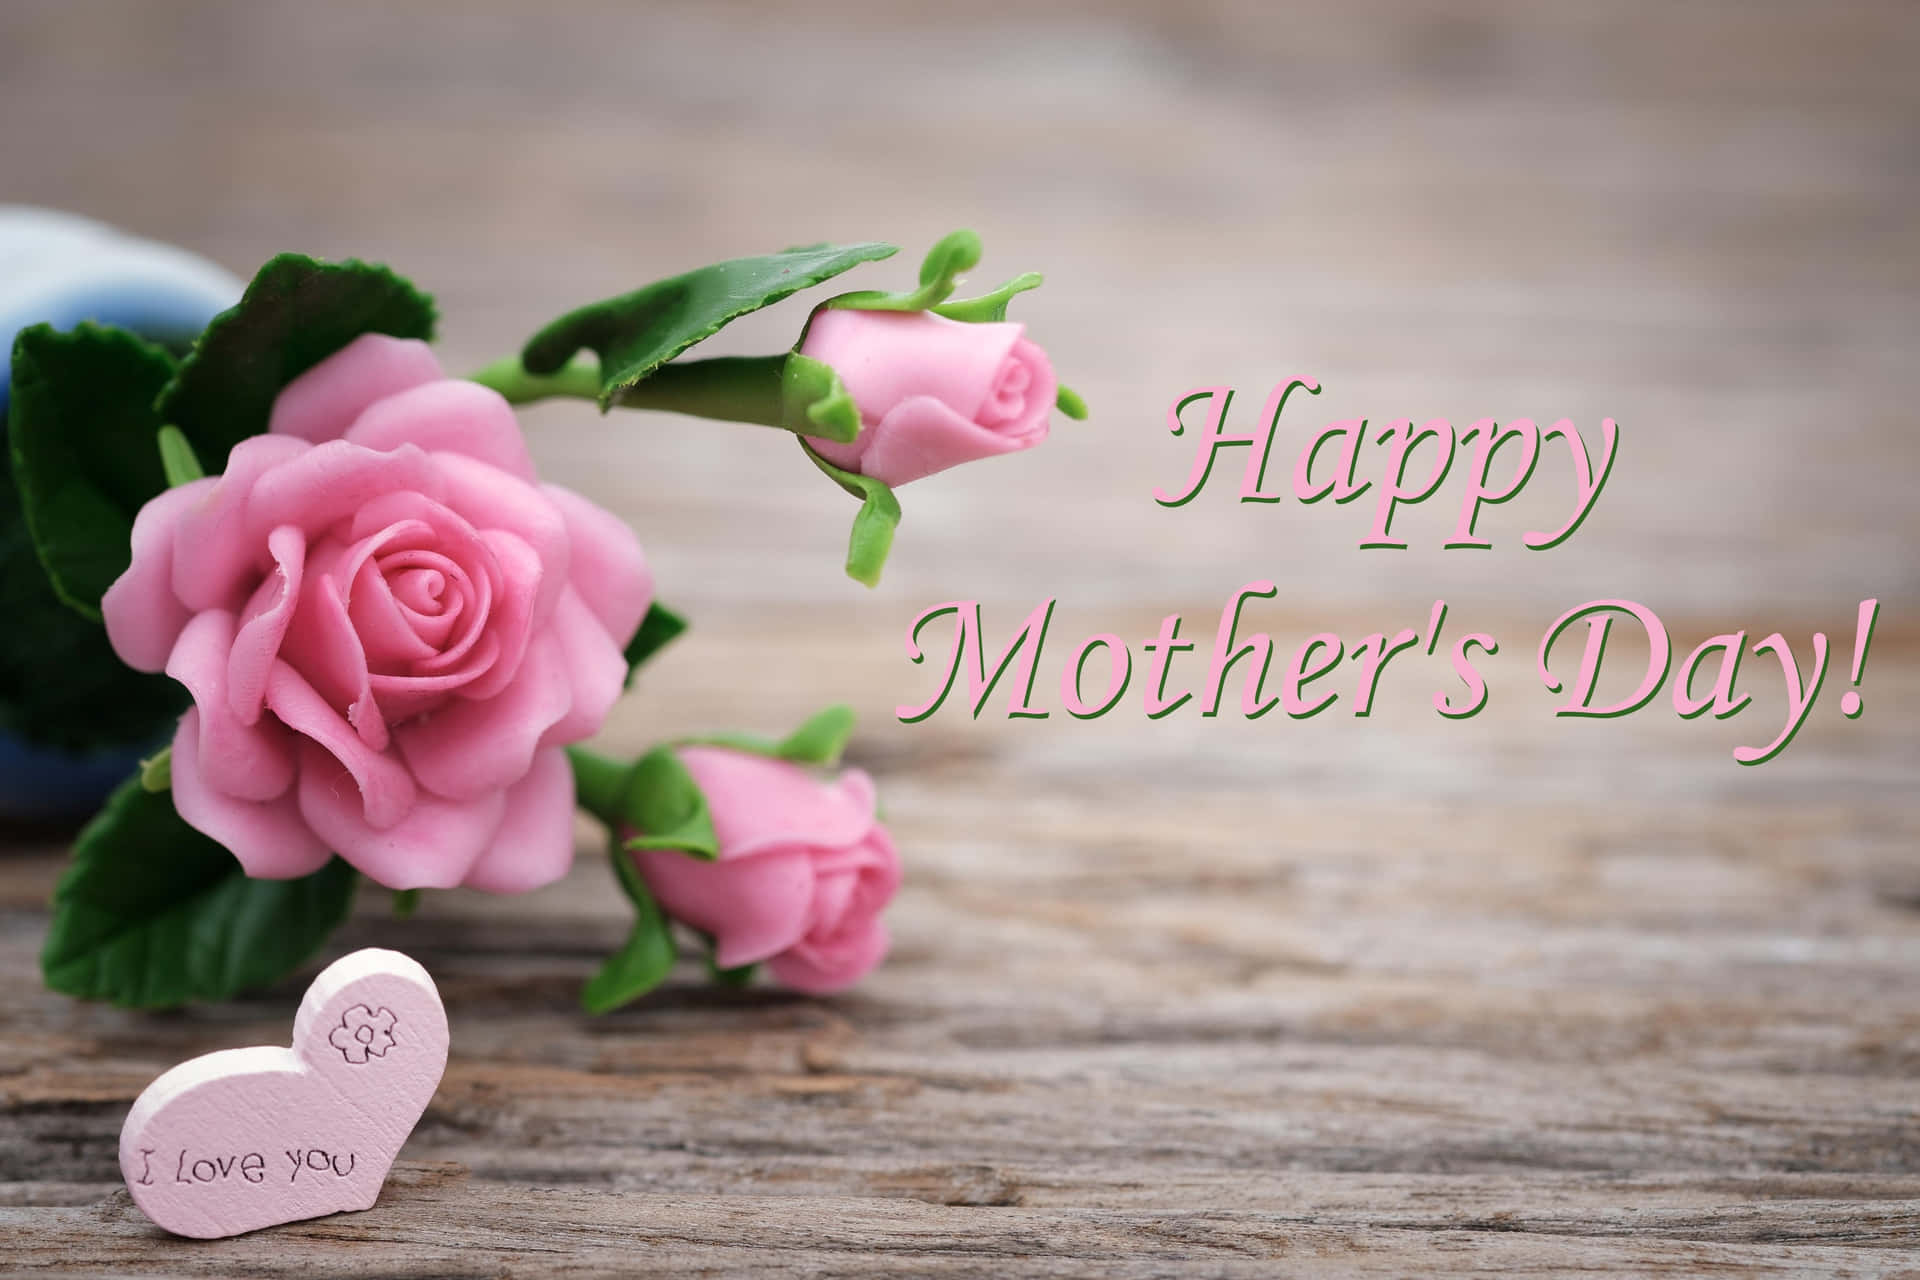 Celebrate your mom on this special day and let her know how much she truly means to you